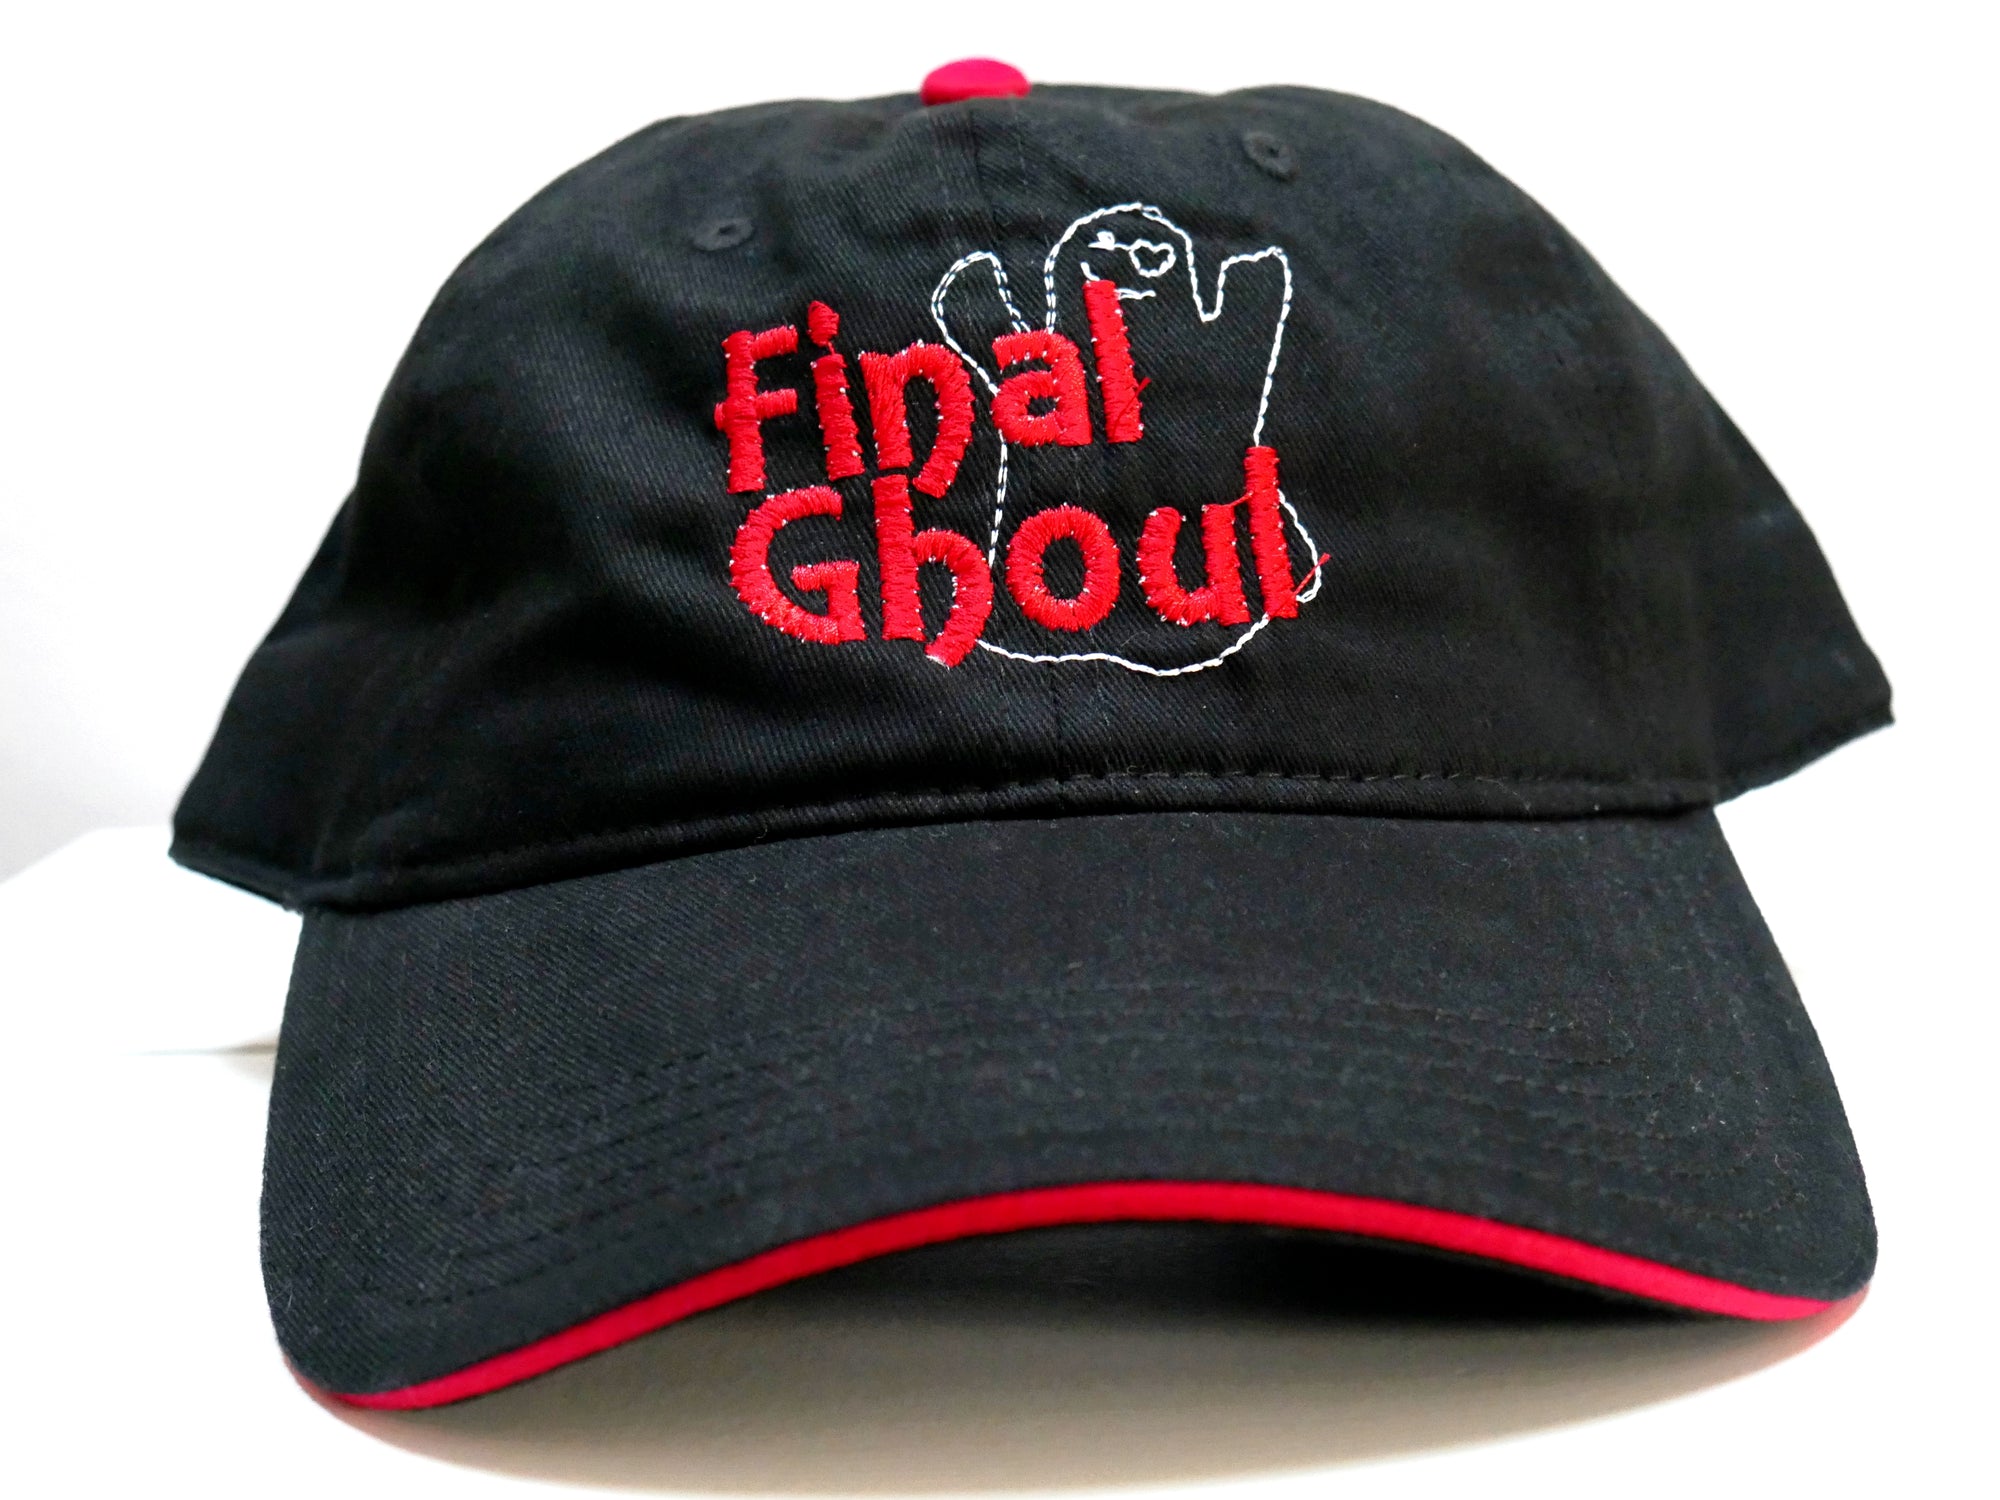 Final Ghoul Hat